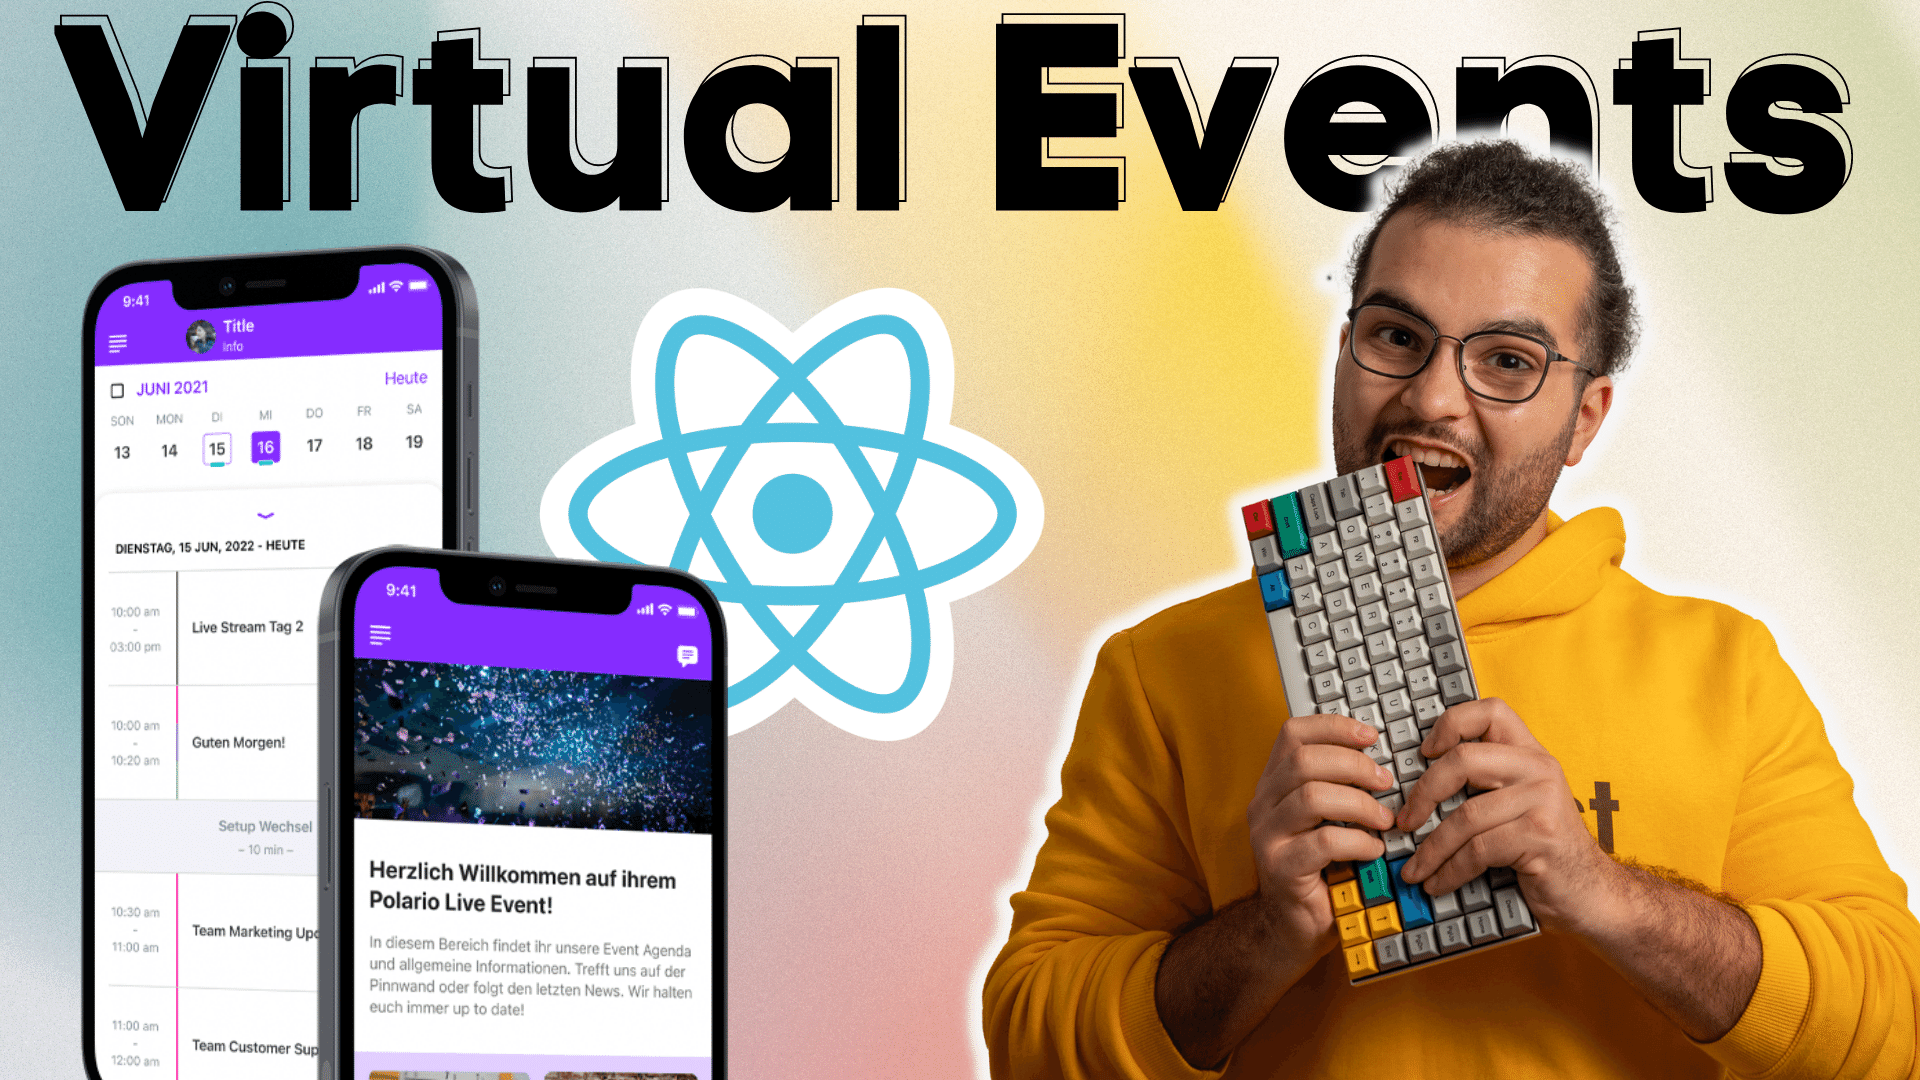 Virtual Events app with React Native (notJust.Hack Workshop)